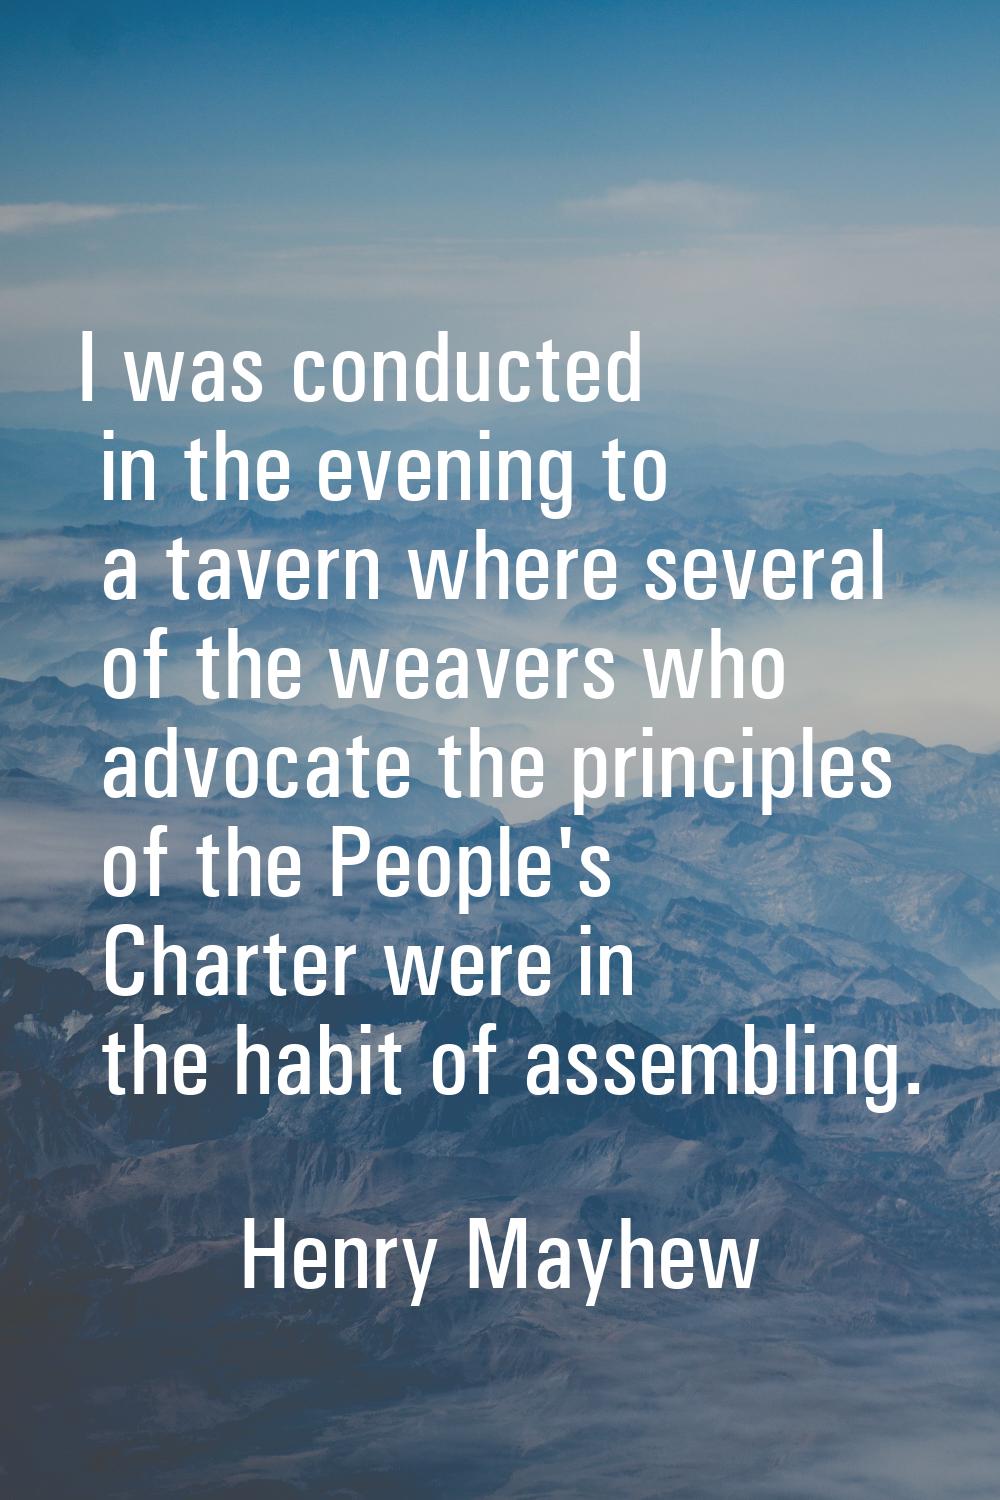 I was conducted in the evening to a tavern where several of the weavers who advocate the principles